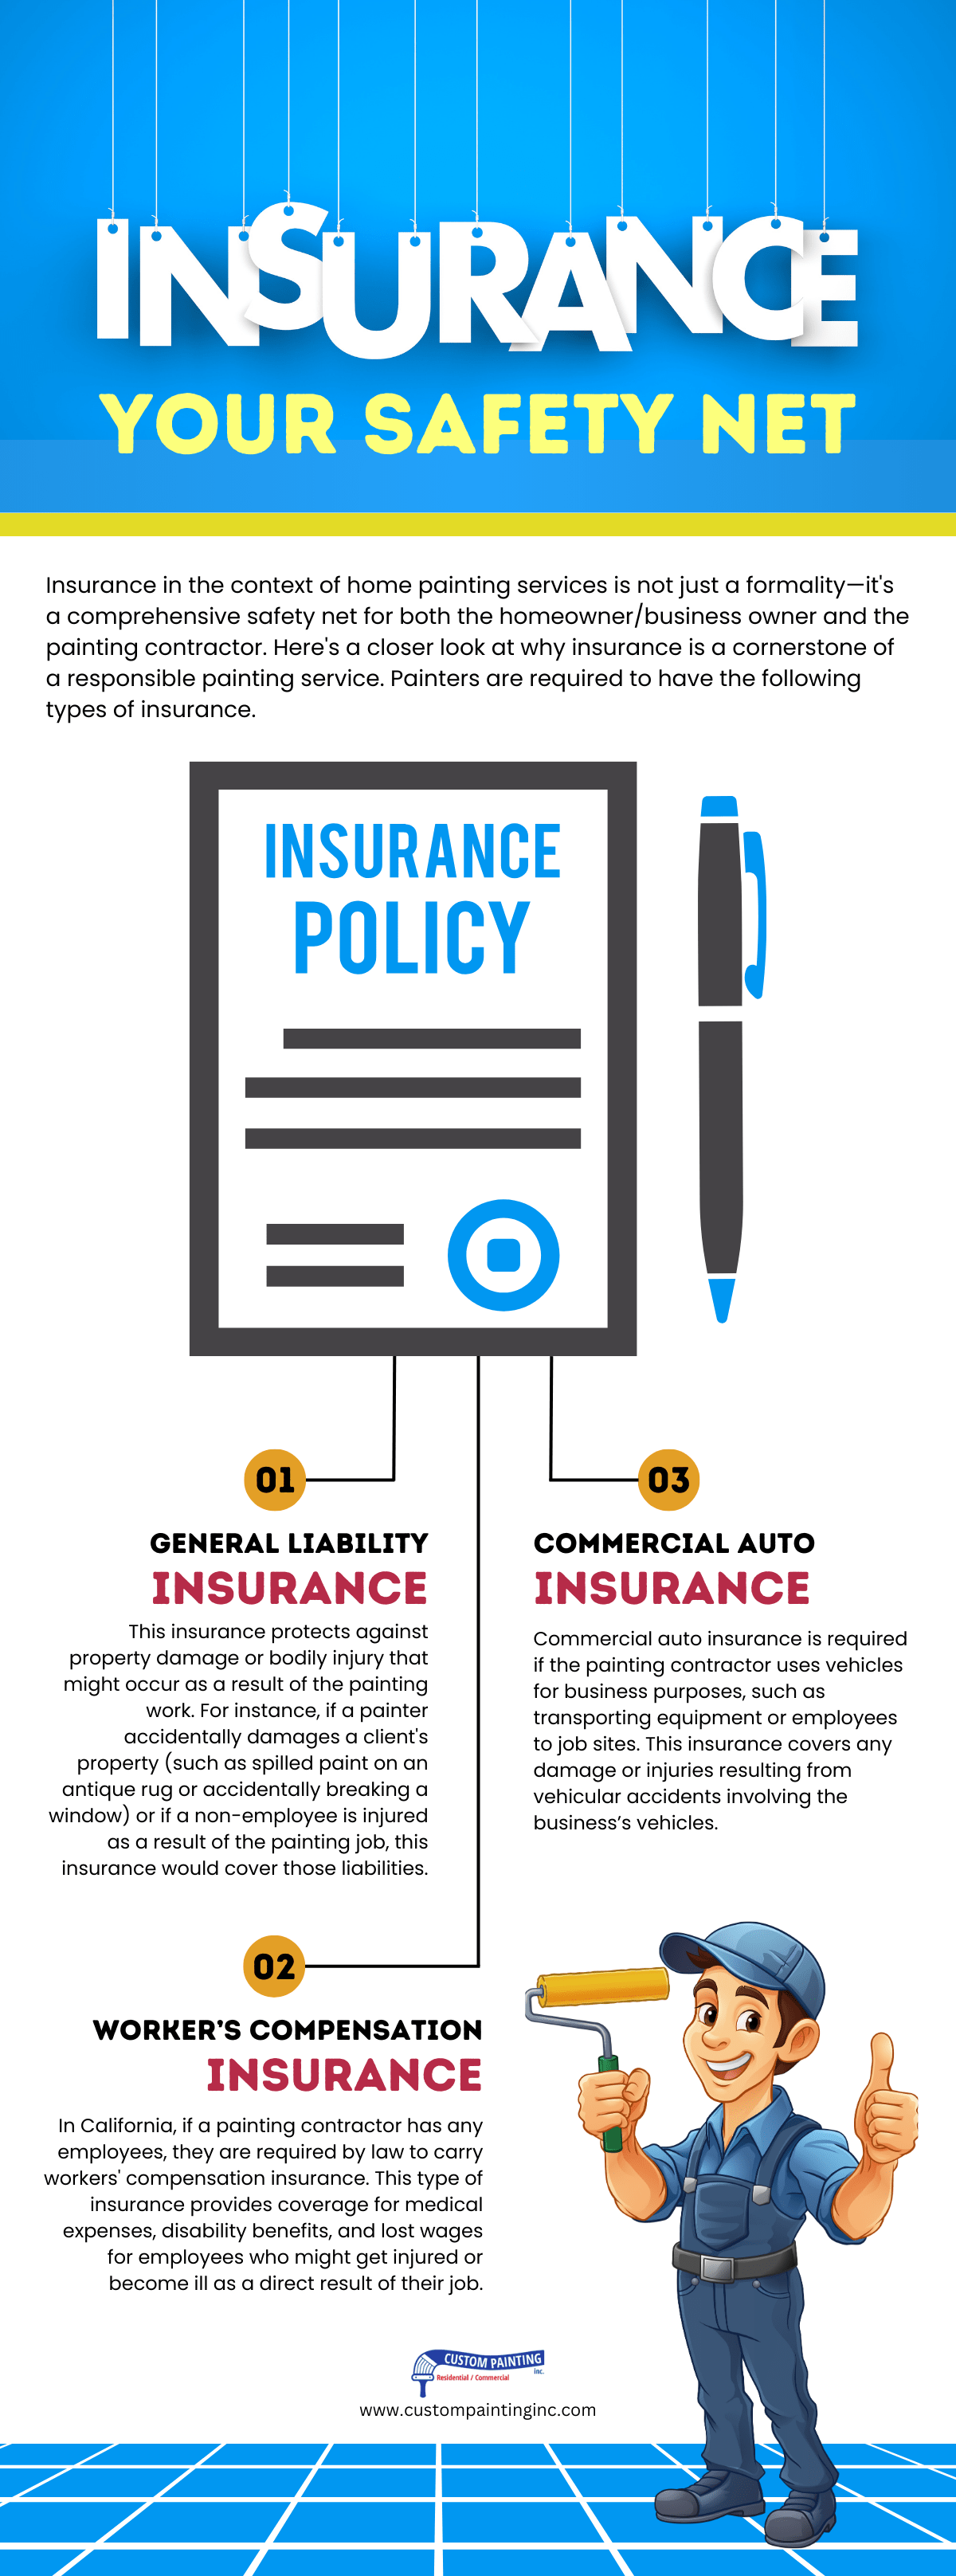 Insurance: Your Safety Net